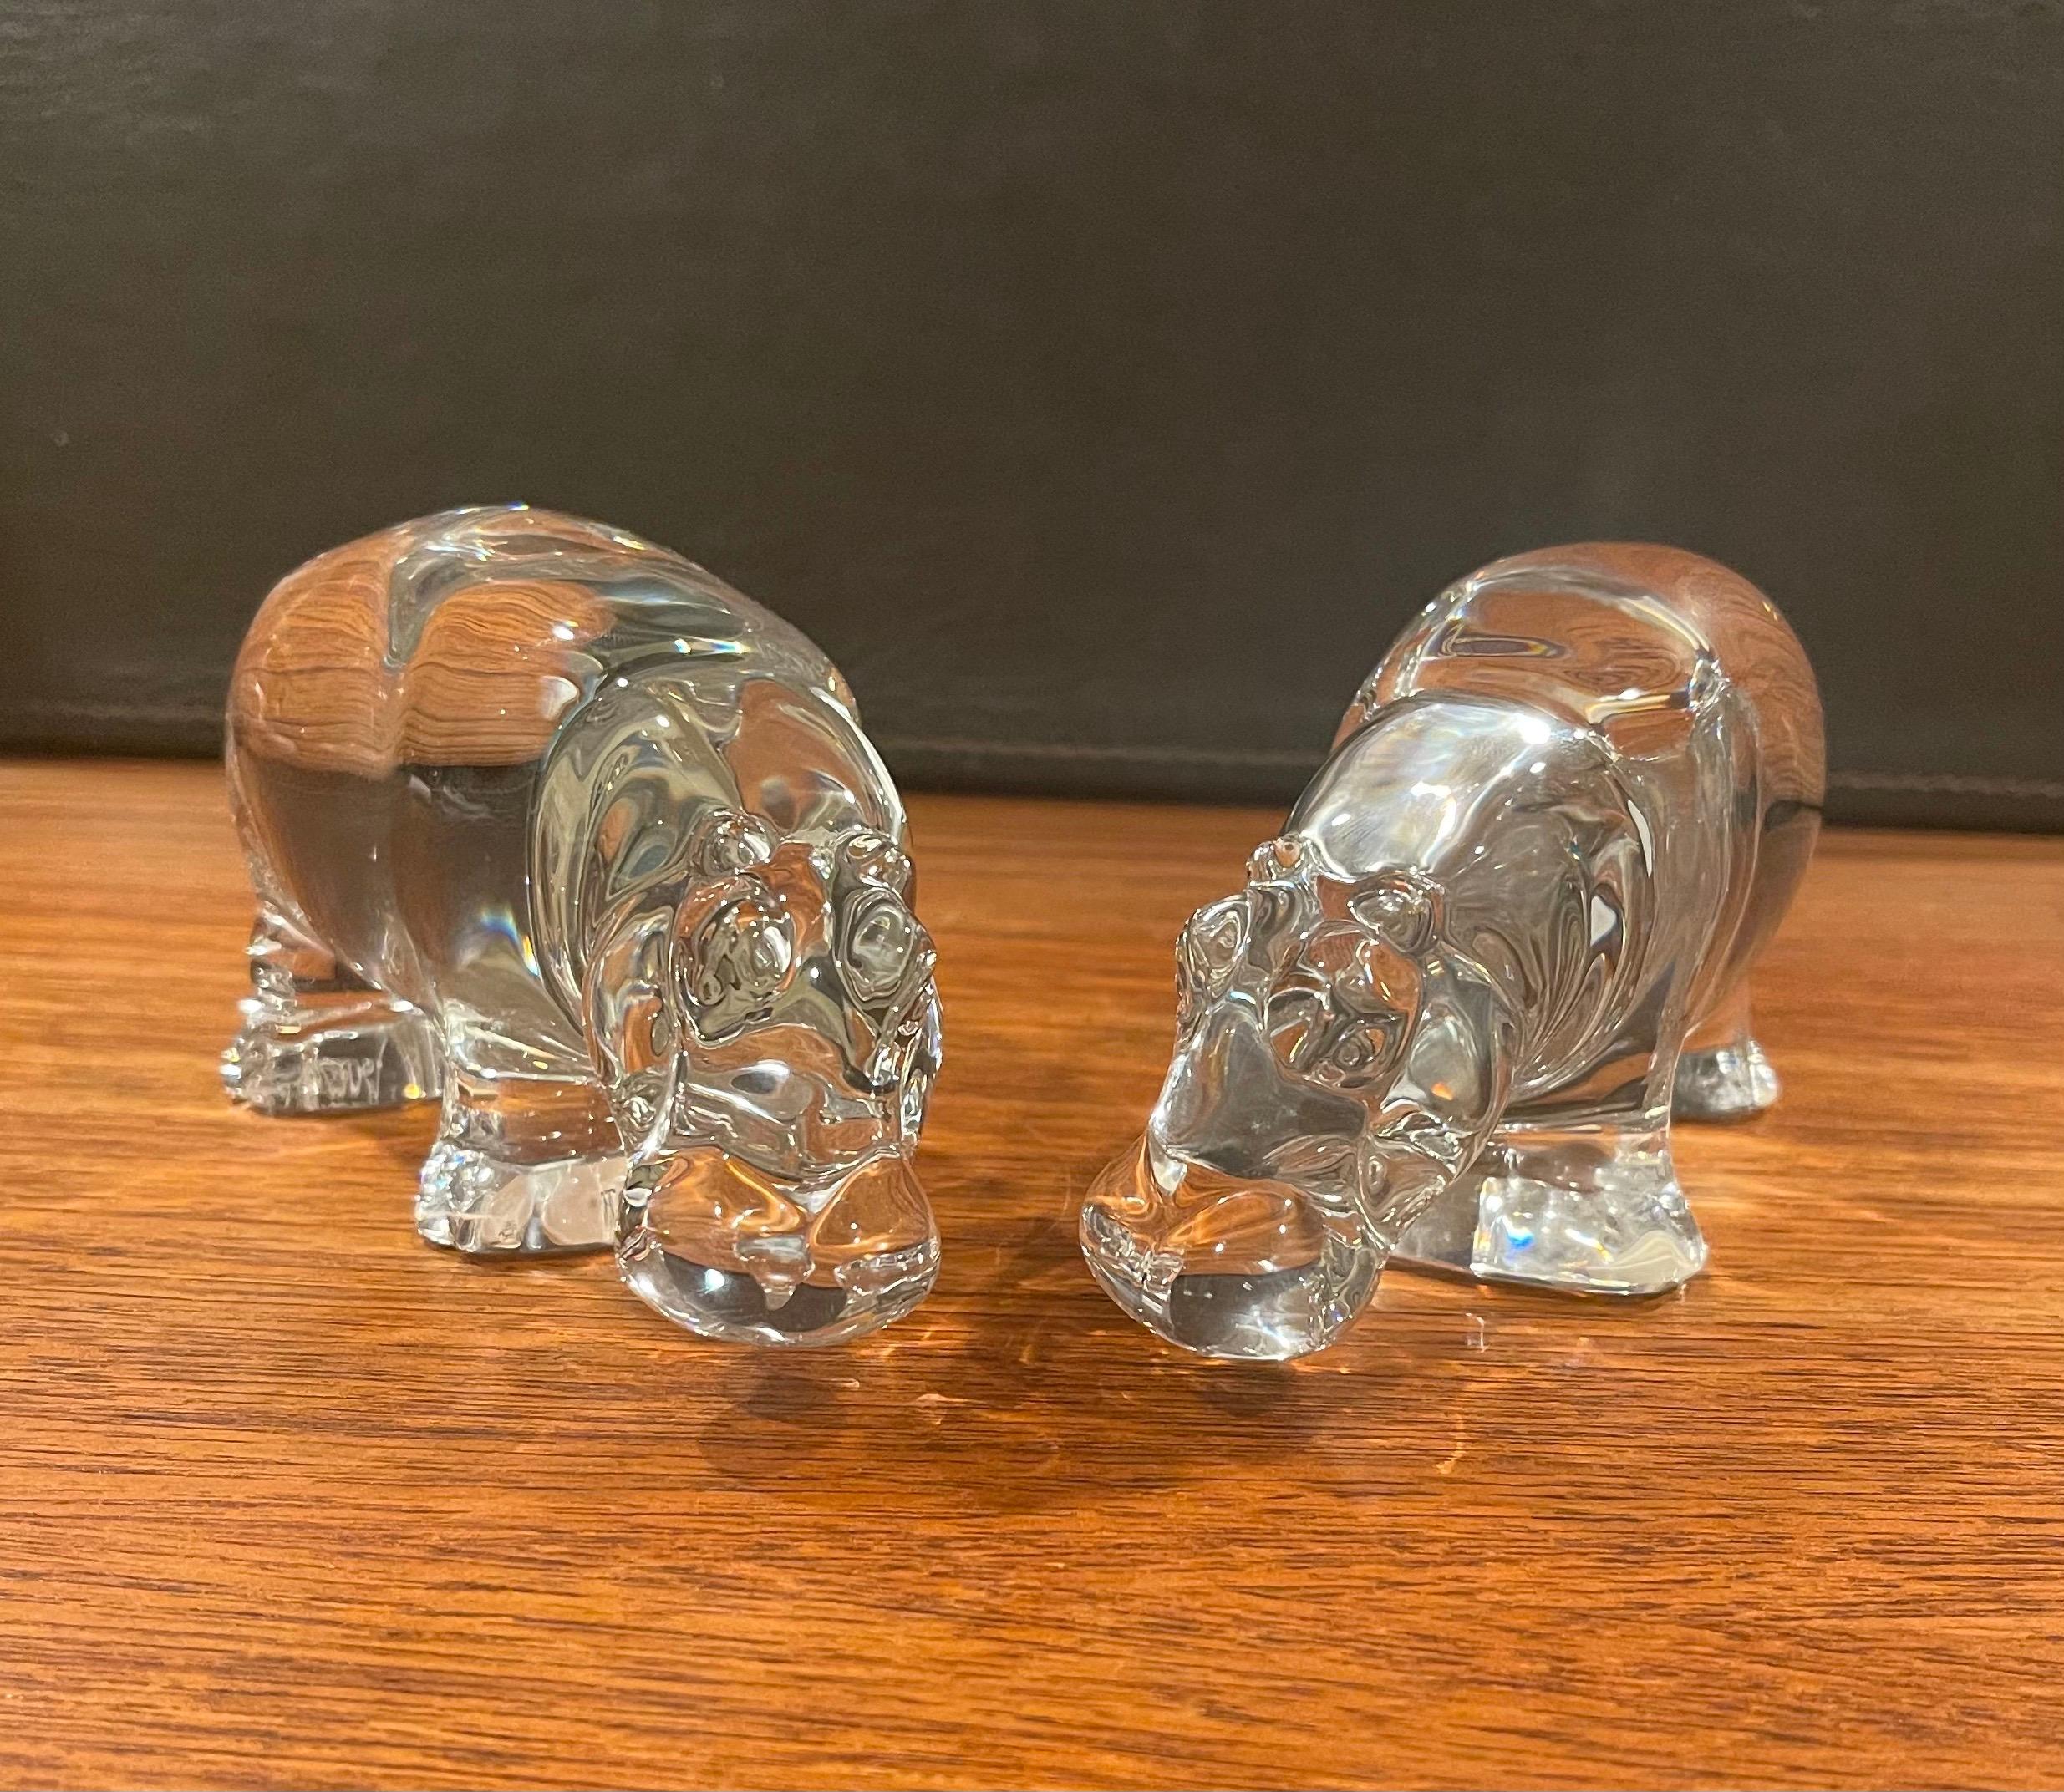 Gorgeous pair of crystal Hippos by Baccarat, circa 1970s. The pair are in very good condition and measures 6